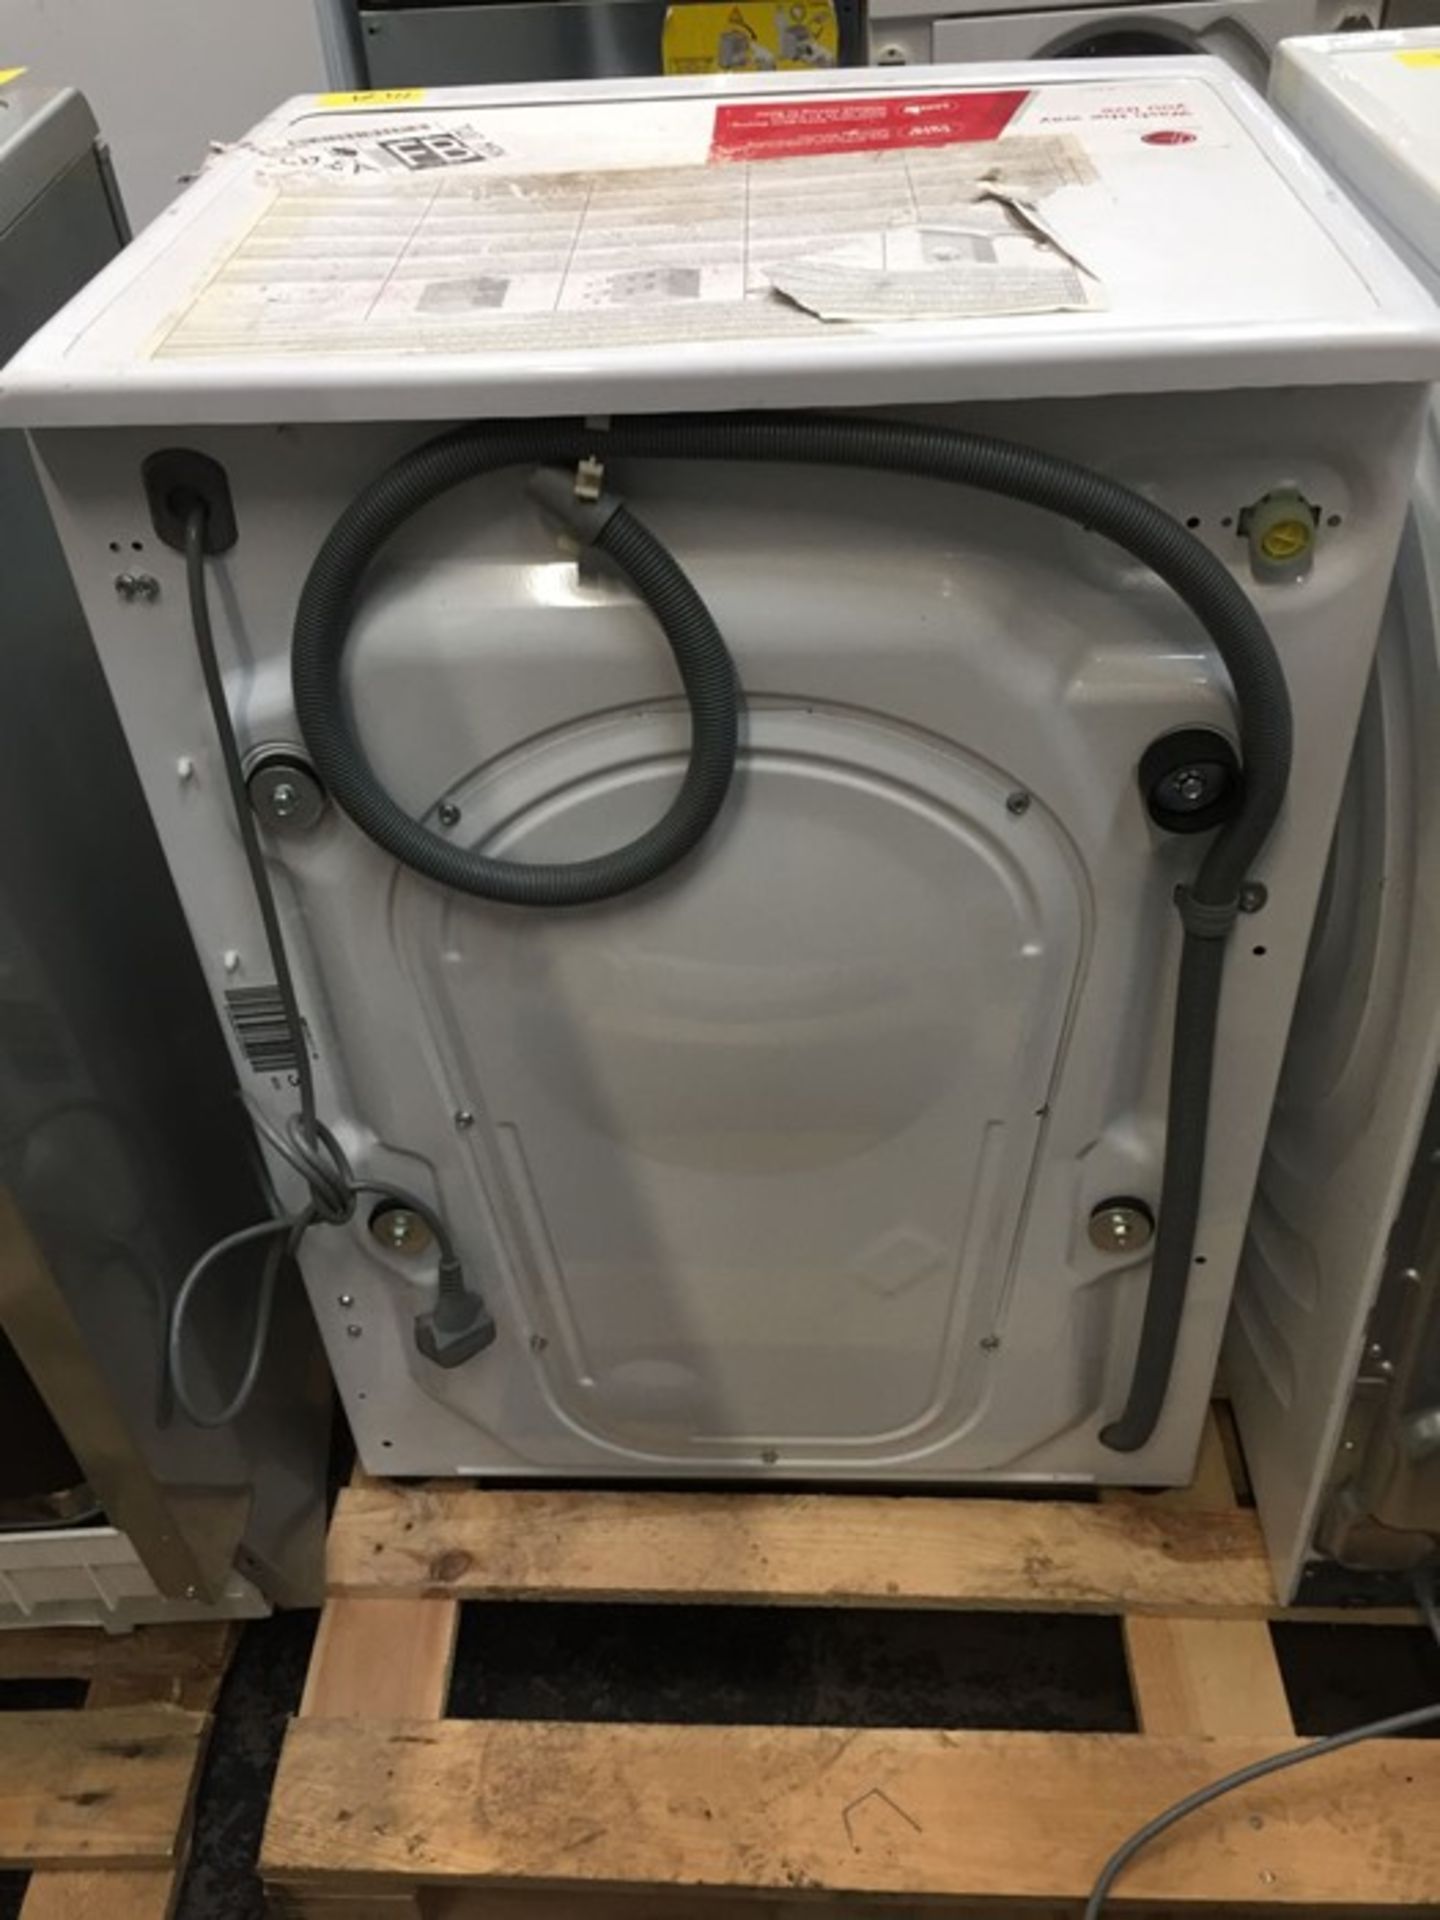 1 HOOVER AWMPD69LH7/1-80 WASHING MACHINE RRP £389.00 CONDITION REPORT FOLLOWS : RETURNED DUE TO - Image 5 of 5